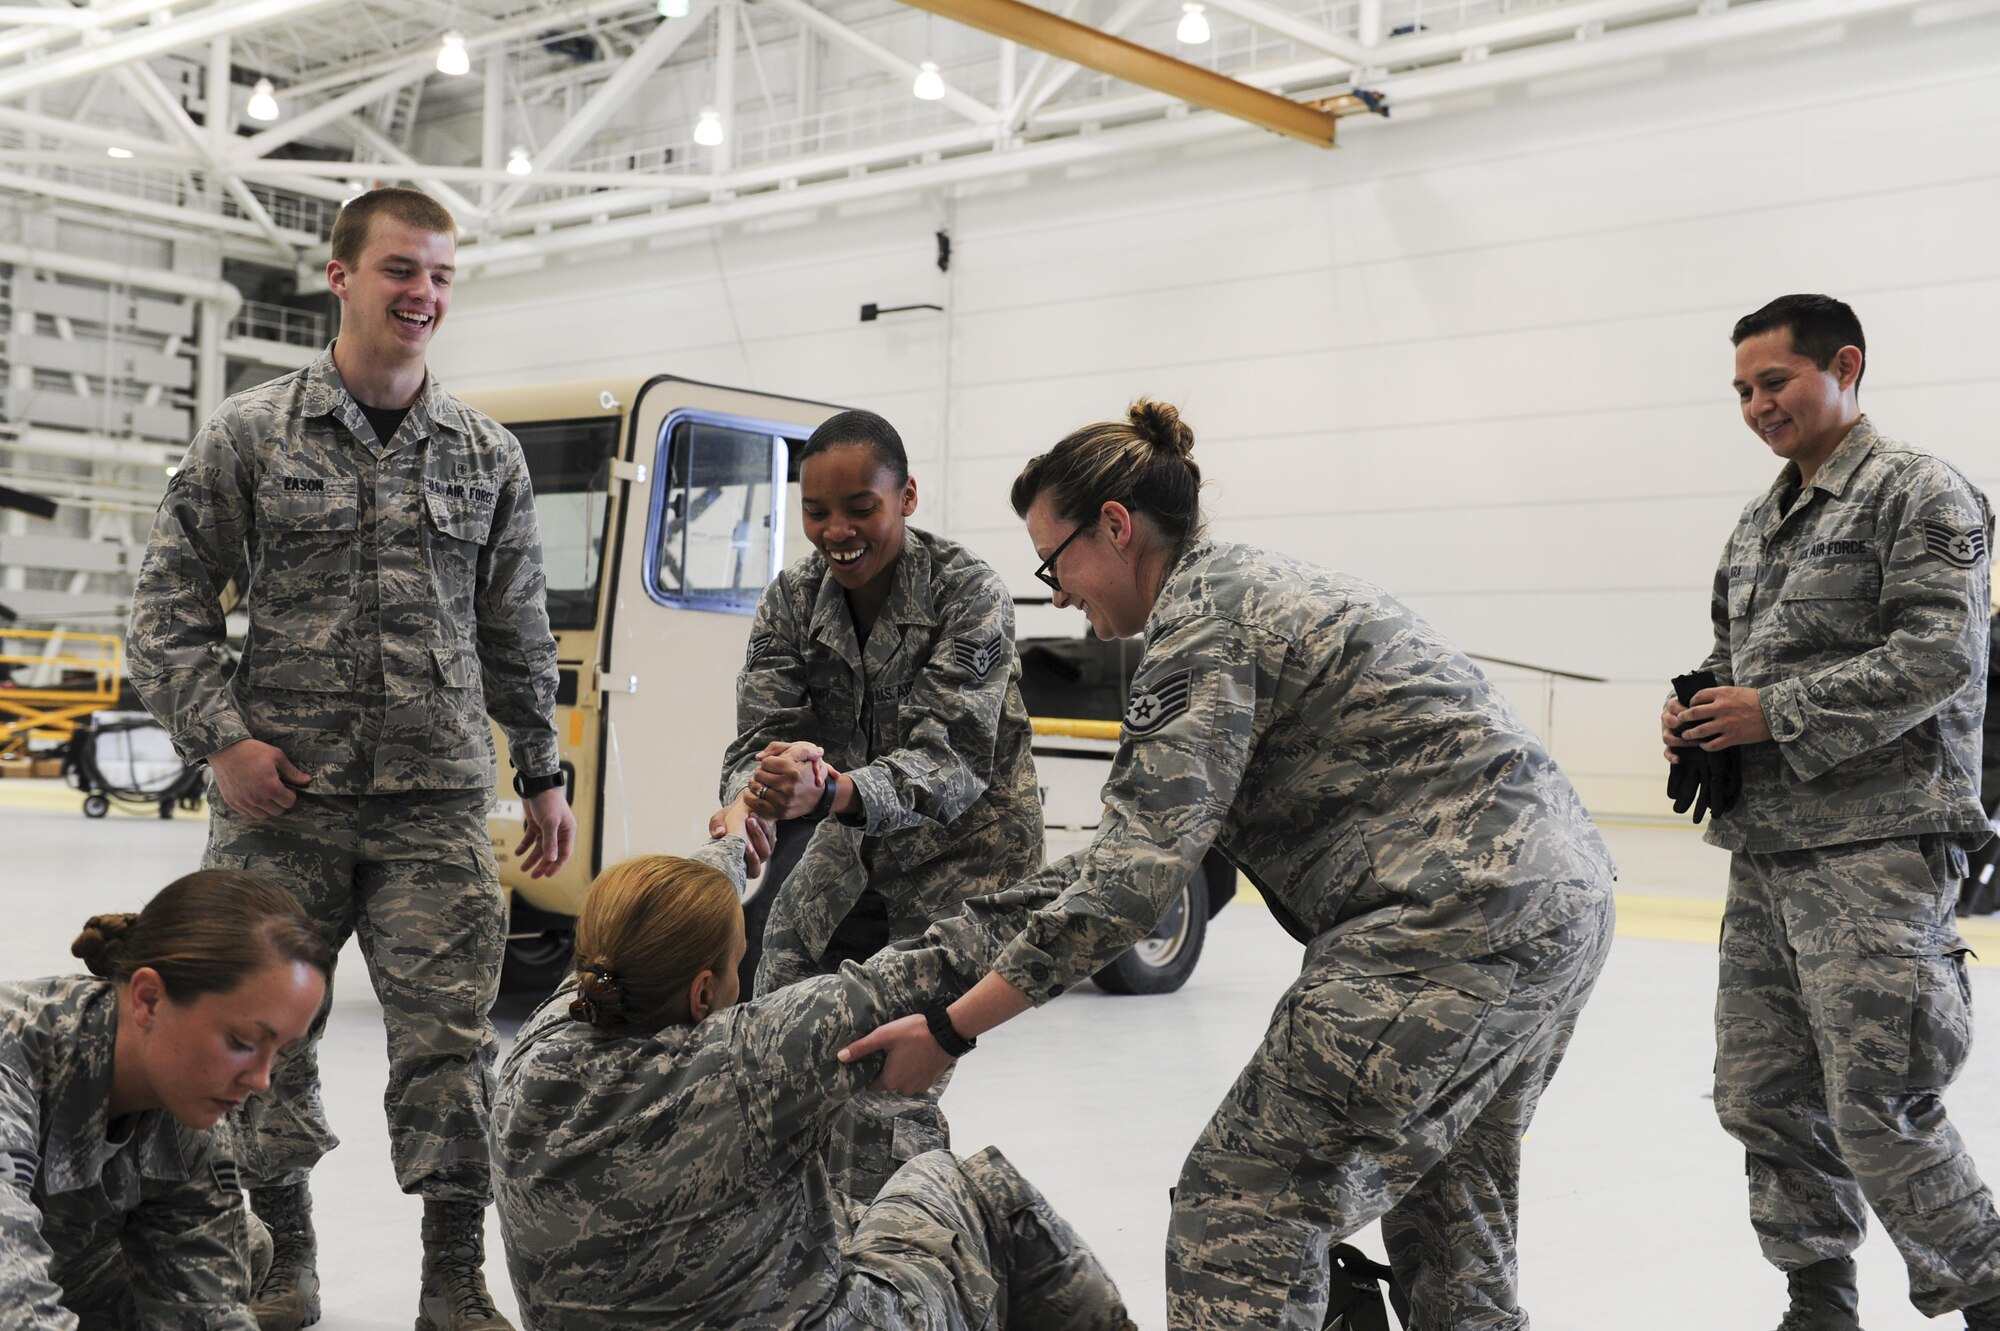 U.S. Airmen assigned to the 354th Medical Operations Squadron at Eielson Air Force, Alaska, participate in joint training Aug. 12, 2016, in Hangar 6 at Ladd Army Airfield on Fort Wainwright, Alaska. Members of the 354th Medical Group trained in preparation for the upcoming Emergency Medical Technician (EMT) Rodeo, a competition where EMT teams demonstrate their lifesaving skills under austere conditions. (U.S. Air Force photo by Airman Isaac Johnson)
